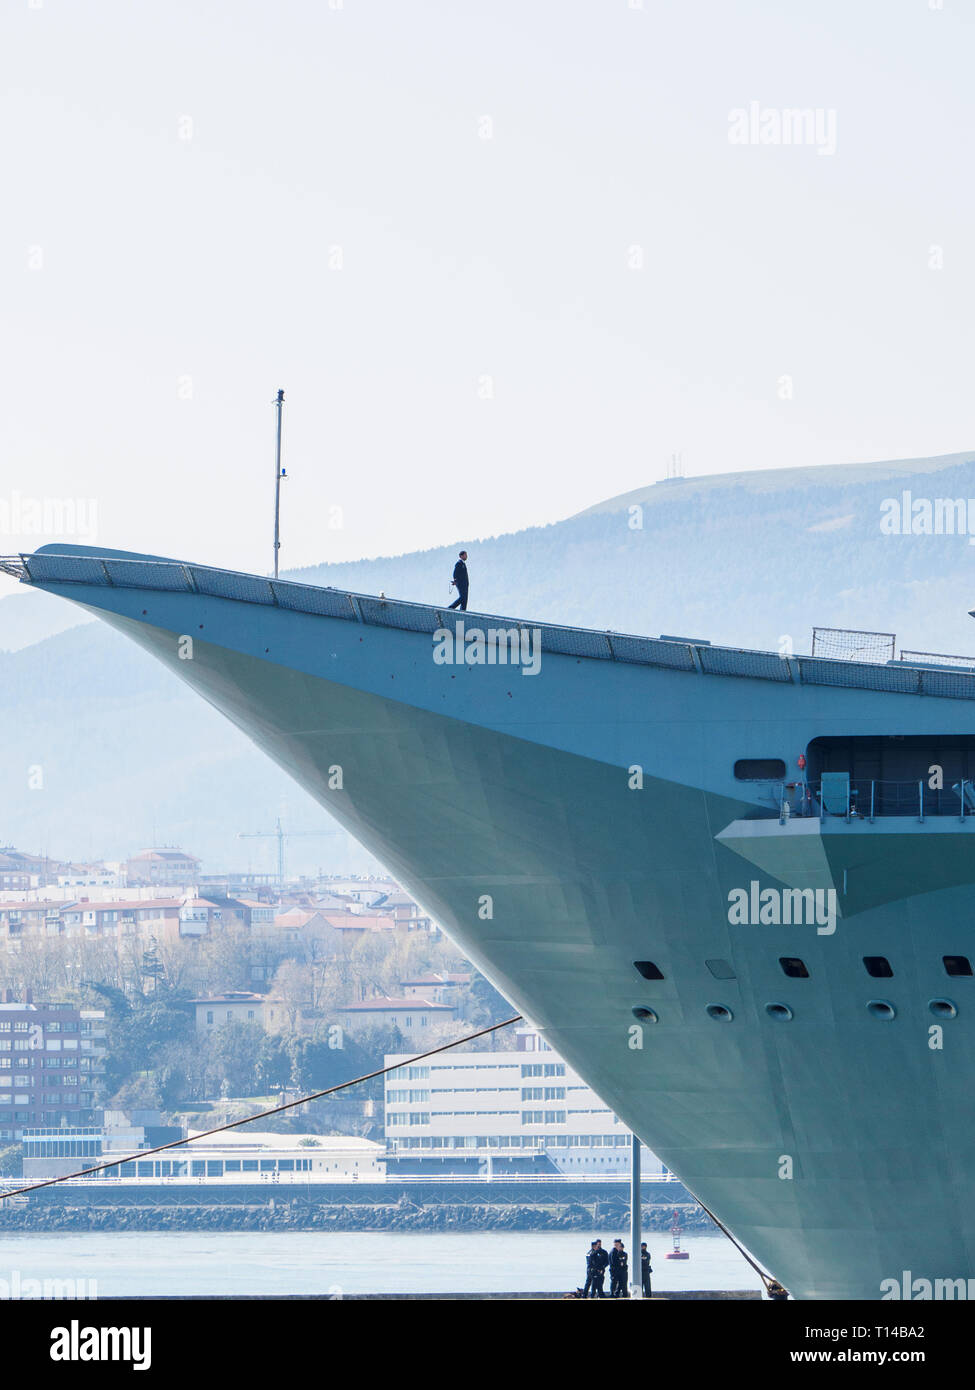 BILBAO, SPAIN - MARCH / 23/2019. The aircraft carrier of the Spanish Navy Juan Carlos I in the port of Bilbao, open day to visit the ship. Sunny day Stock Photo